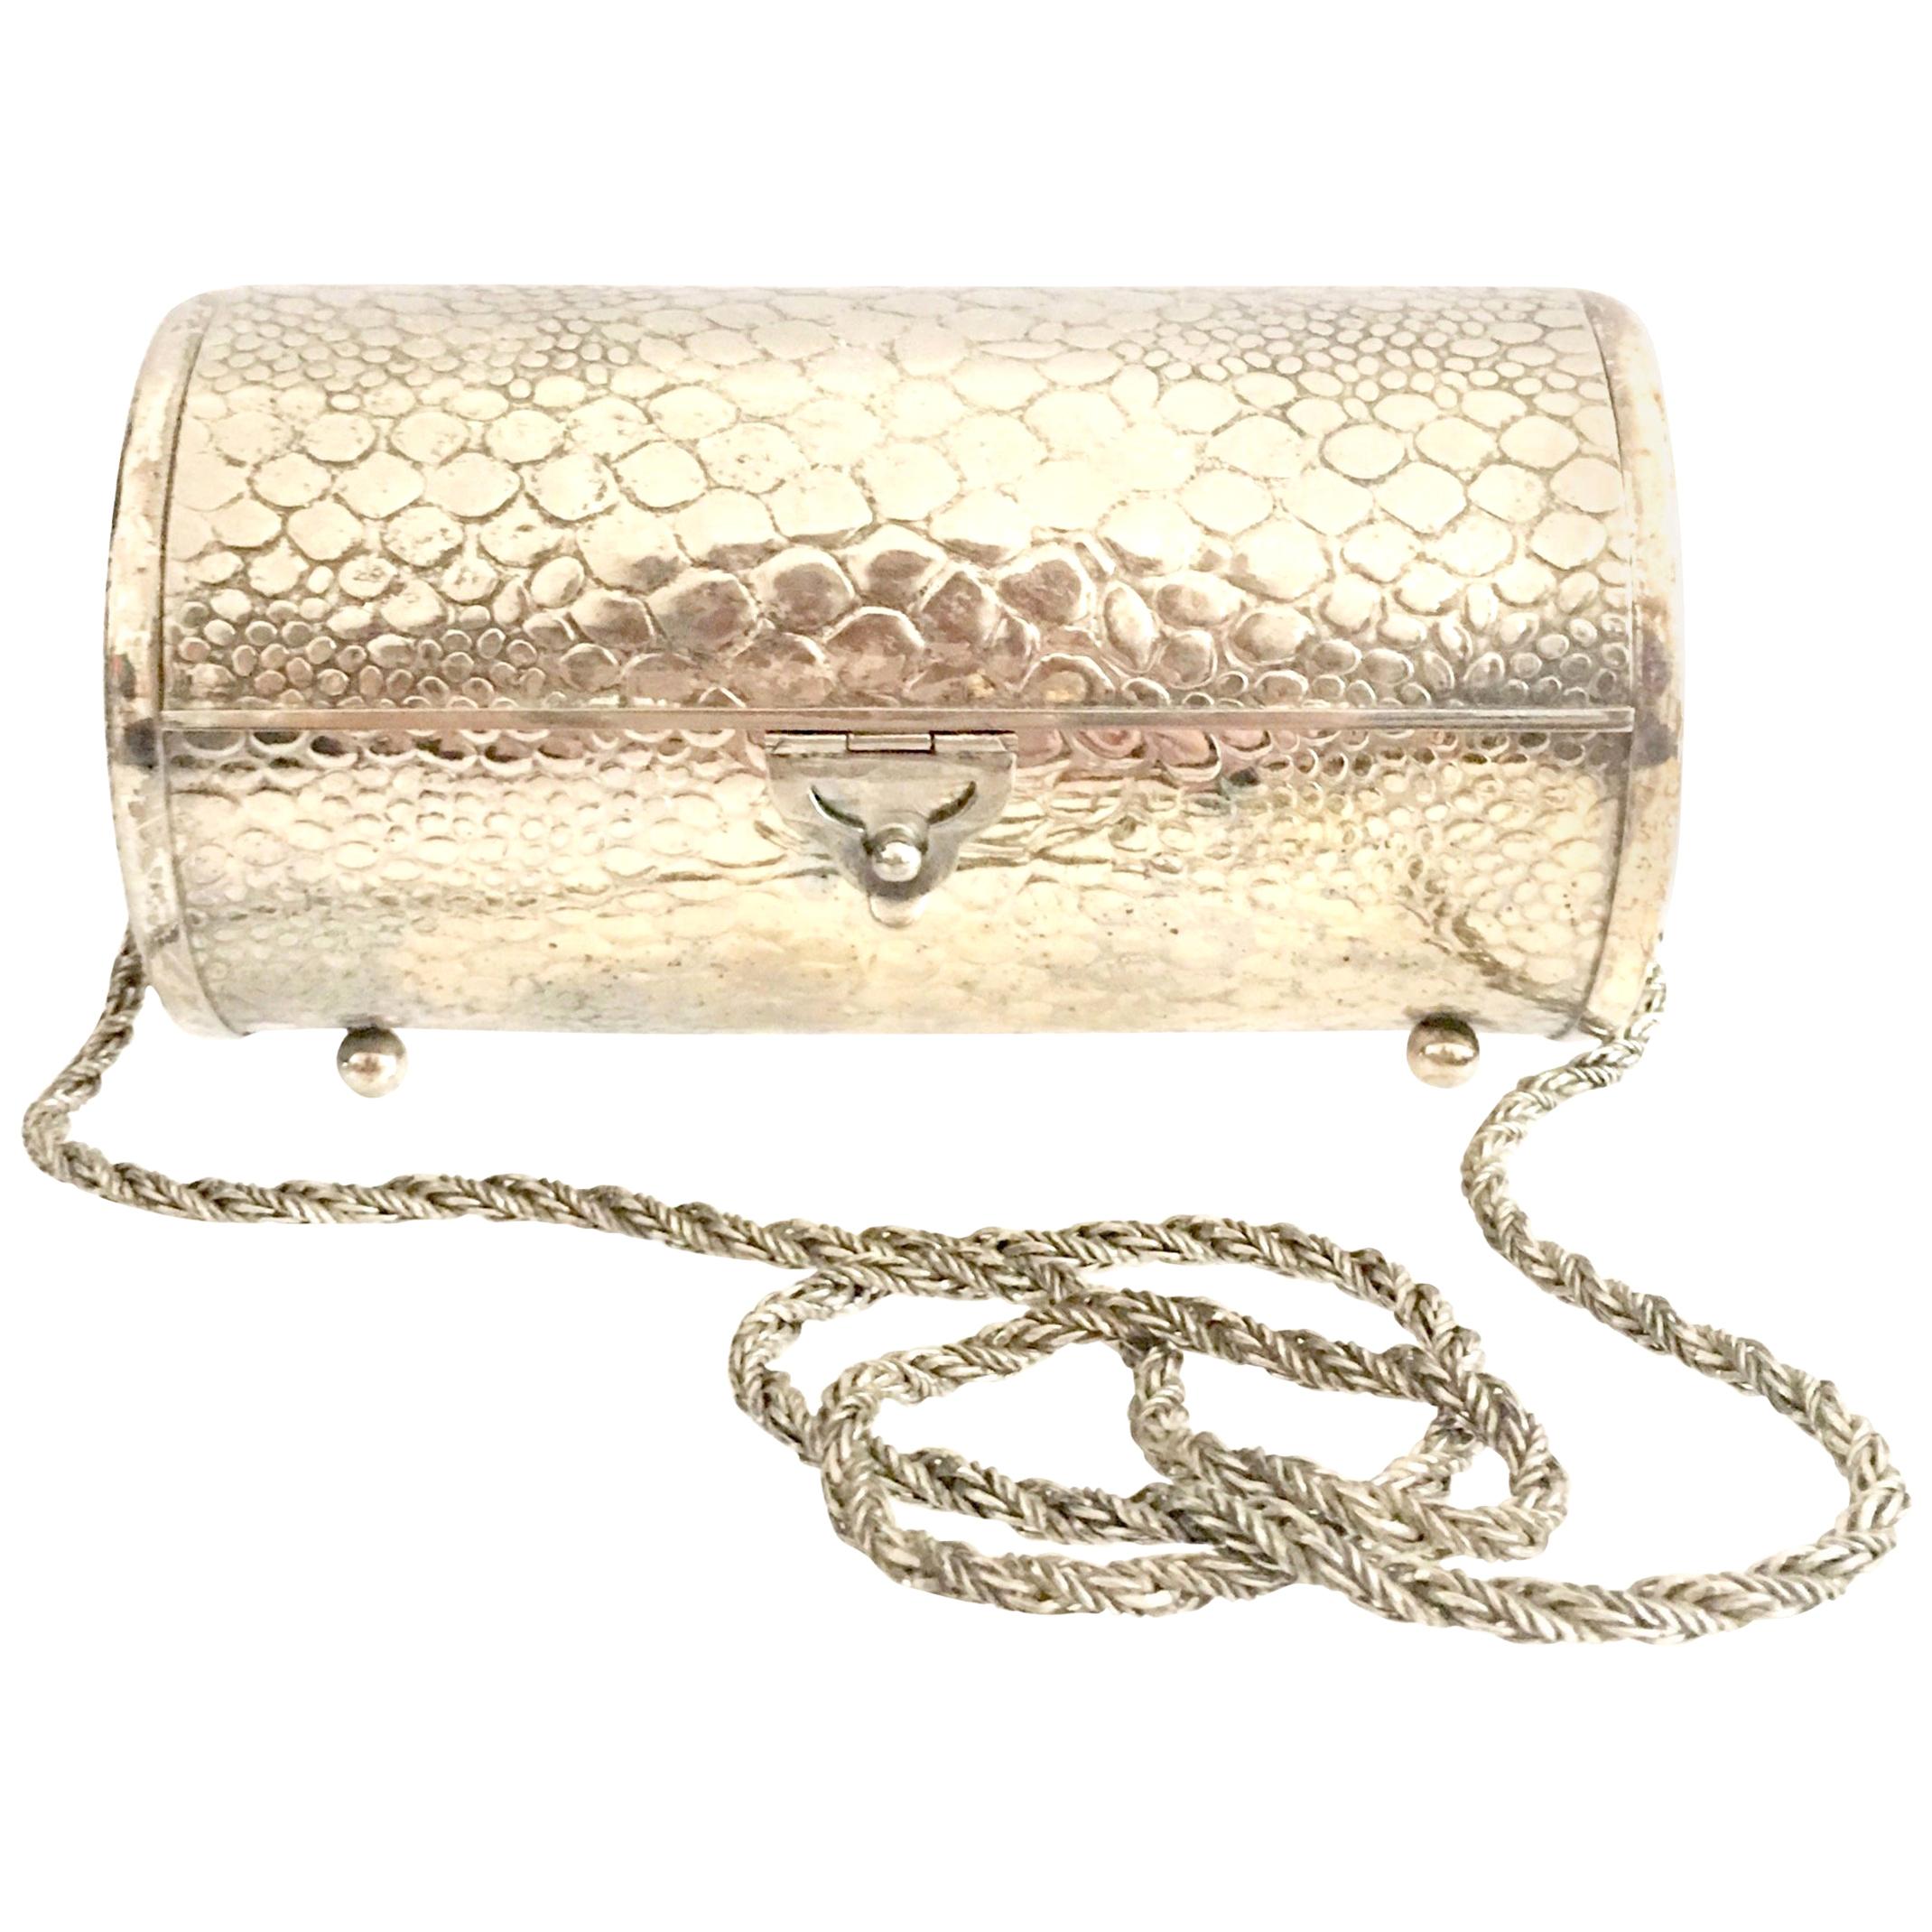 80'S Silver Plate "Tootsie Roll" Box Evening Bag By, Morris Moscowitz For Sale